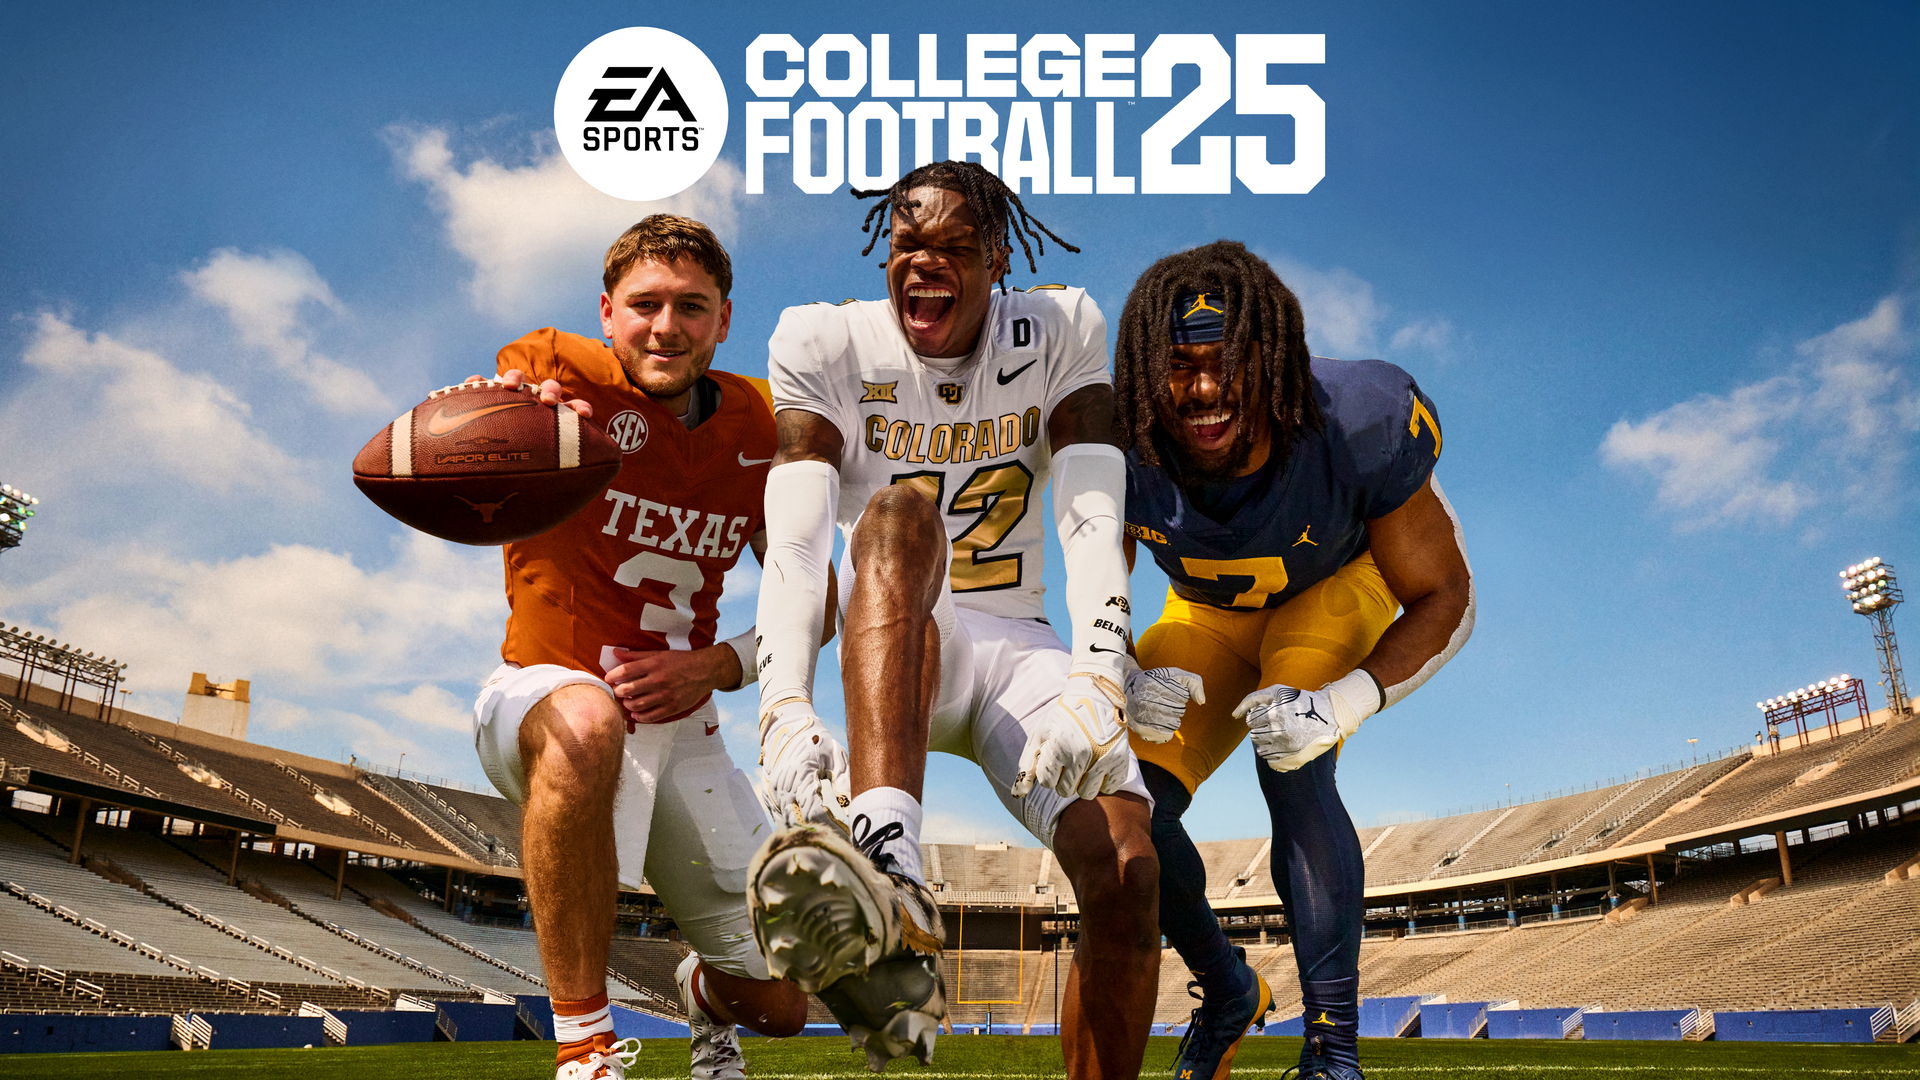 Quinn Ewers, Travis Hunter, and Donovan Edwards, in their respective Texas, Colorado and Michigan uniforms, in a promotional image for EA Sports College Football 25